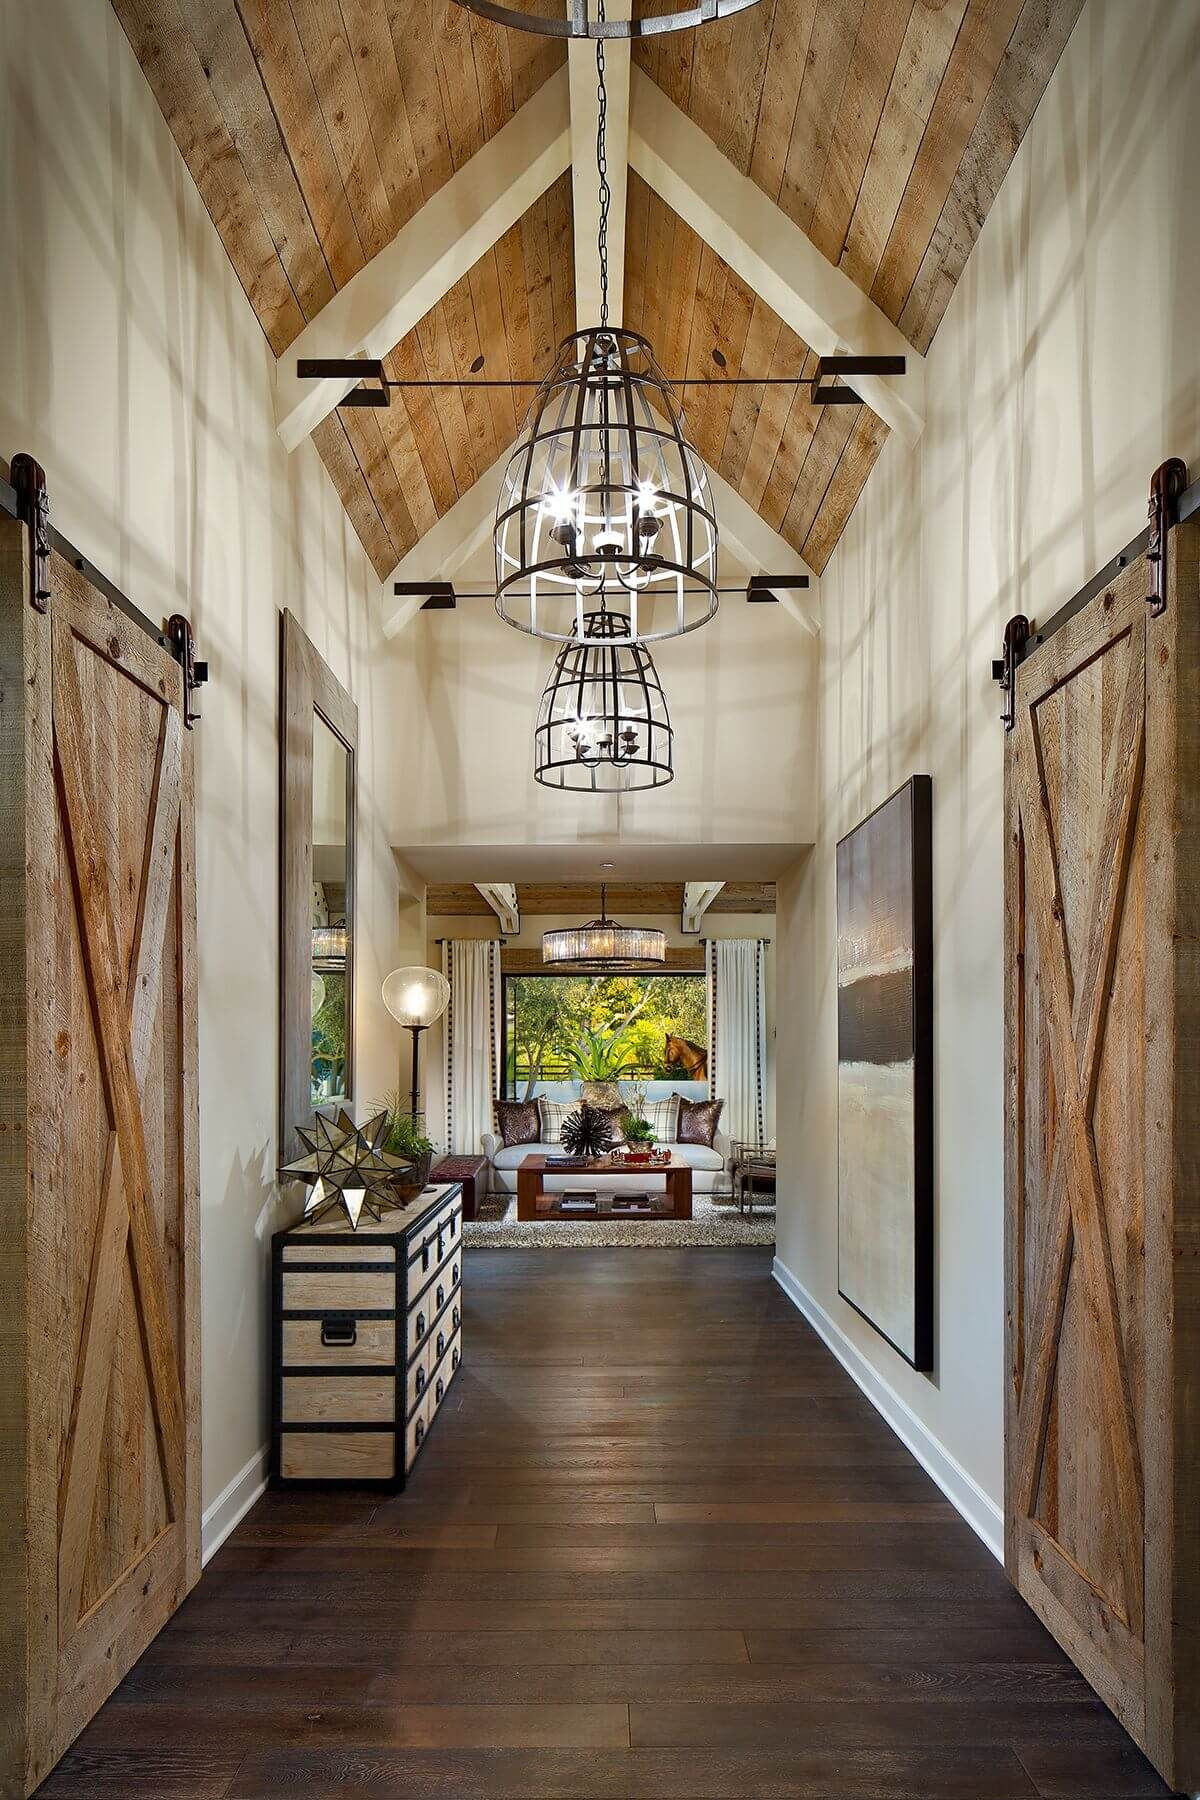 13 Famous Hardwood Floors with Wood Ceilings 2022 free download hardwood floors with wood ceilings of 35 rustic farmhouse interior design ideas that will inspire your in 35 rustic farmhouse interior design ideas that will inspire your next remodel